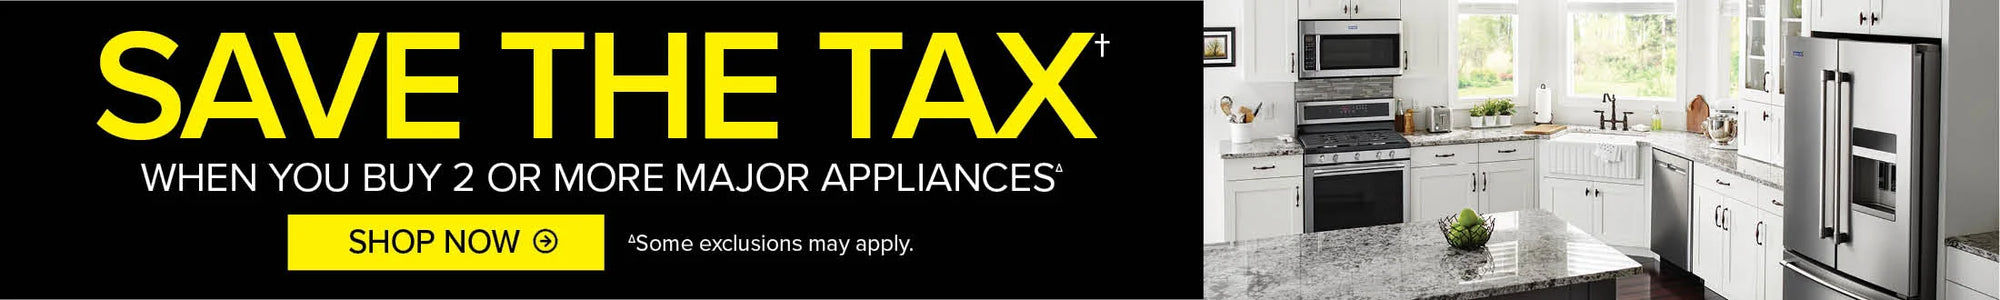 Save the tax when you buy 2 or more on major appliances. Shop now.